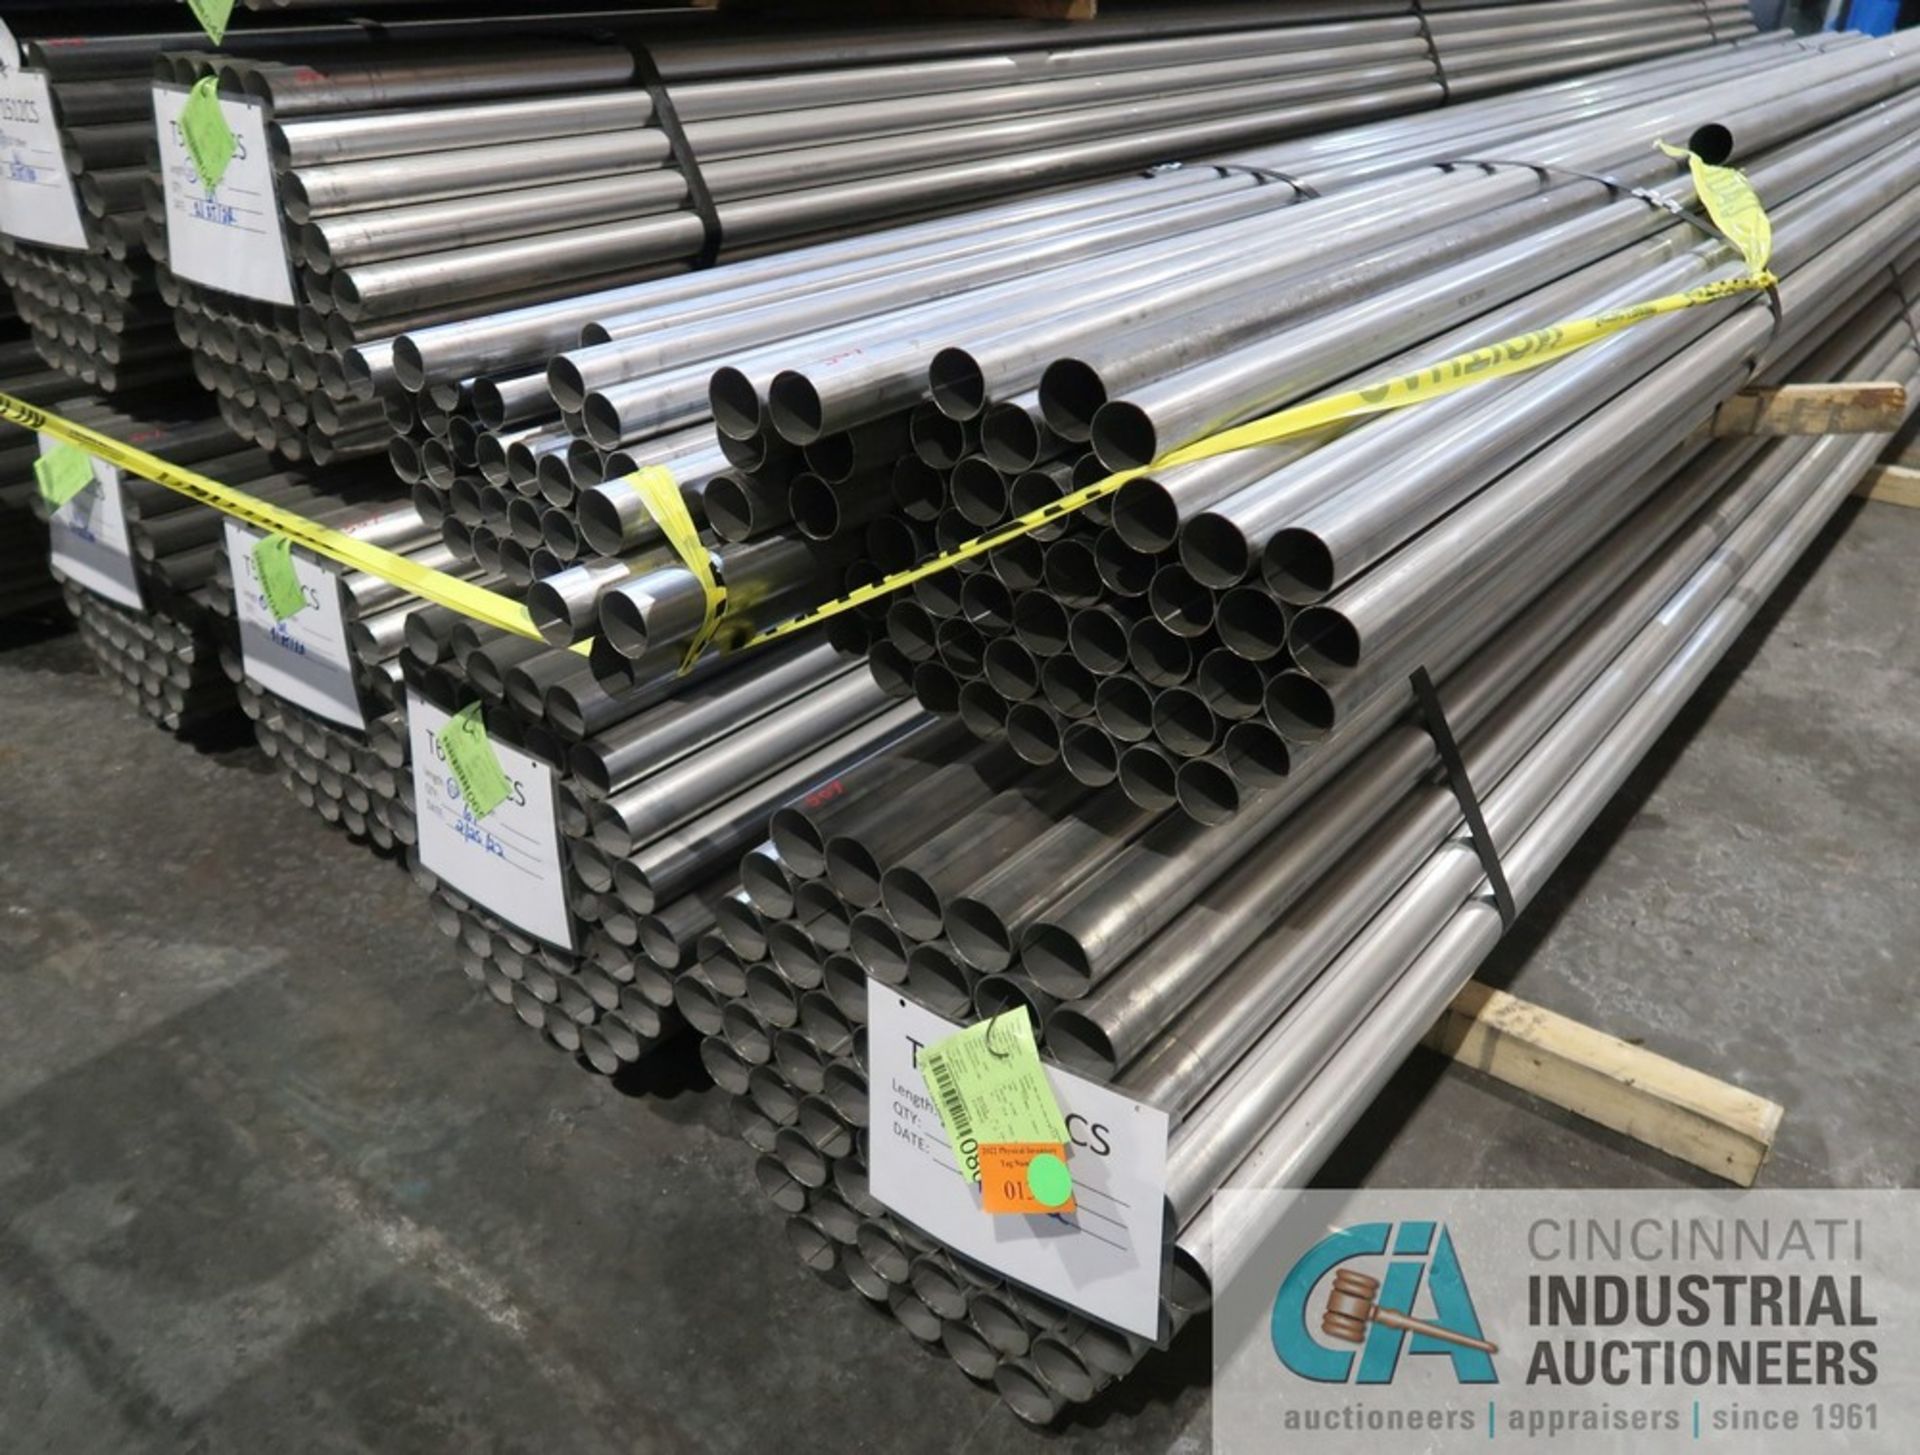 (LOT) (21) BUNDLES OF 20' LONG X .065 ALUMINIZED STEEL TUBING, APPROX. 1,200 TOTAL PIECES, APPROX. - Image 4 of 7